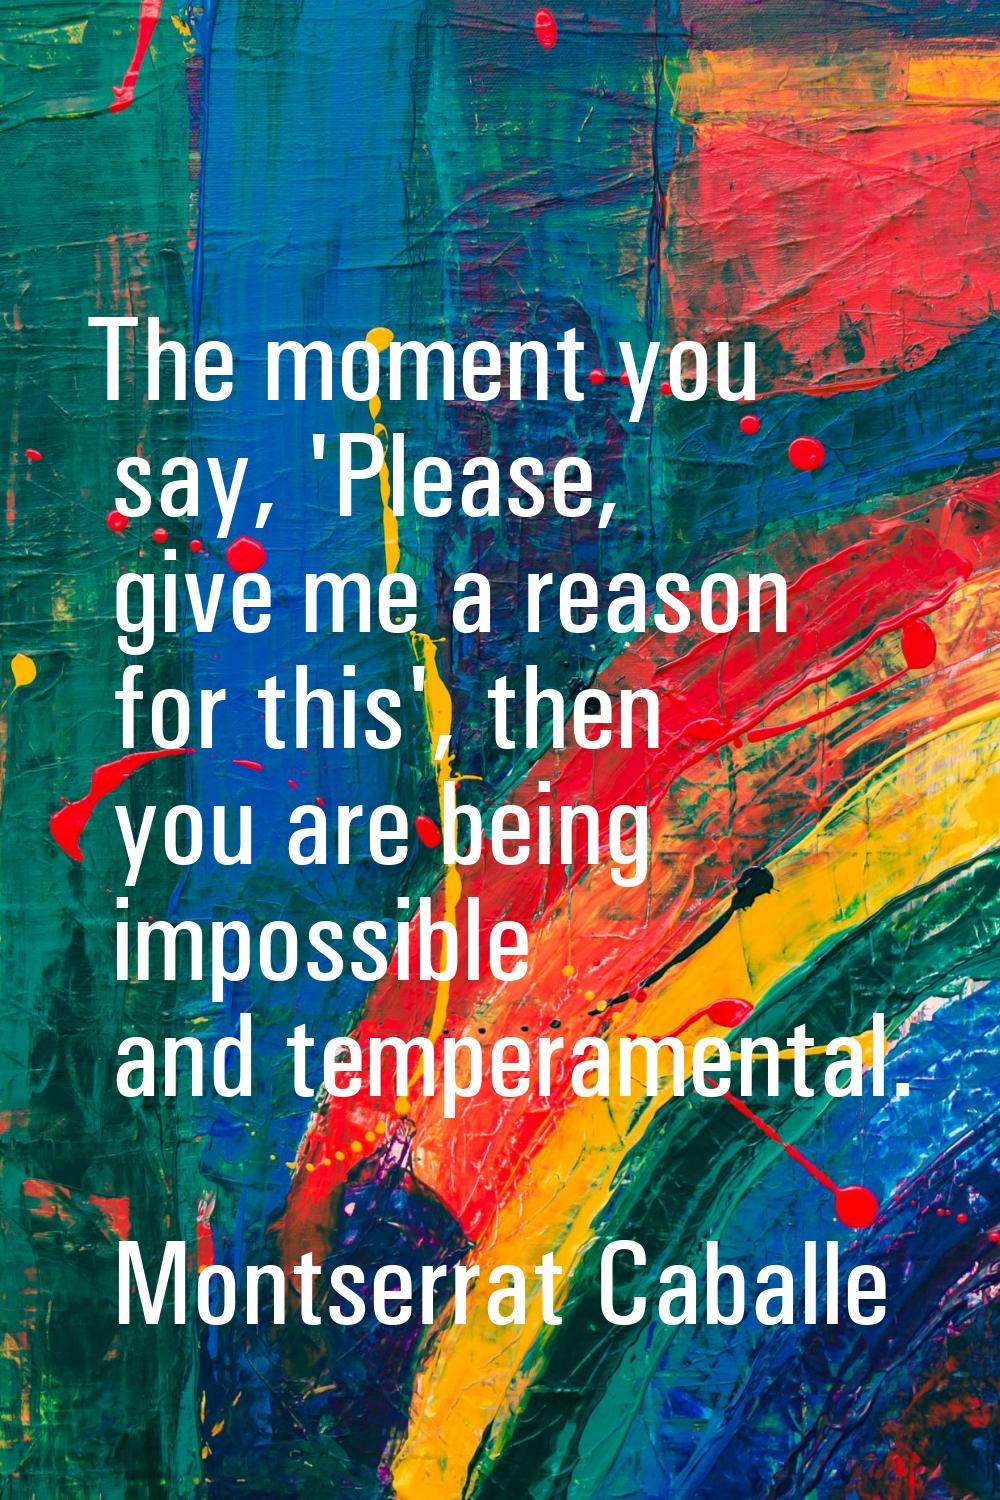 The moment you say, 'Please, give me a reason for this', then you are being impossible and temperam